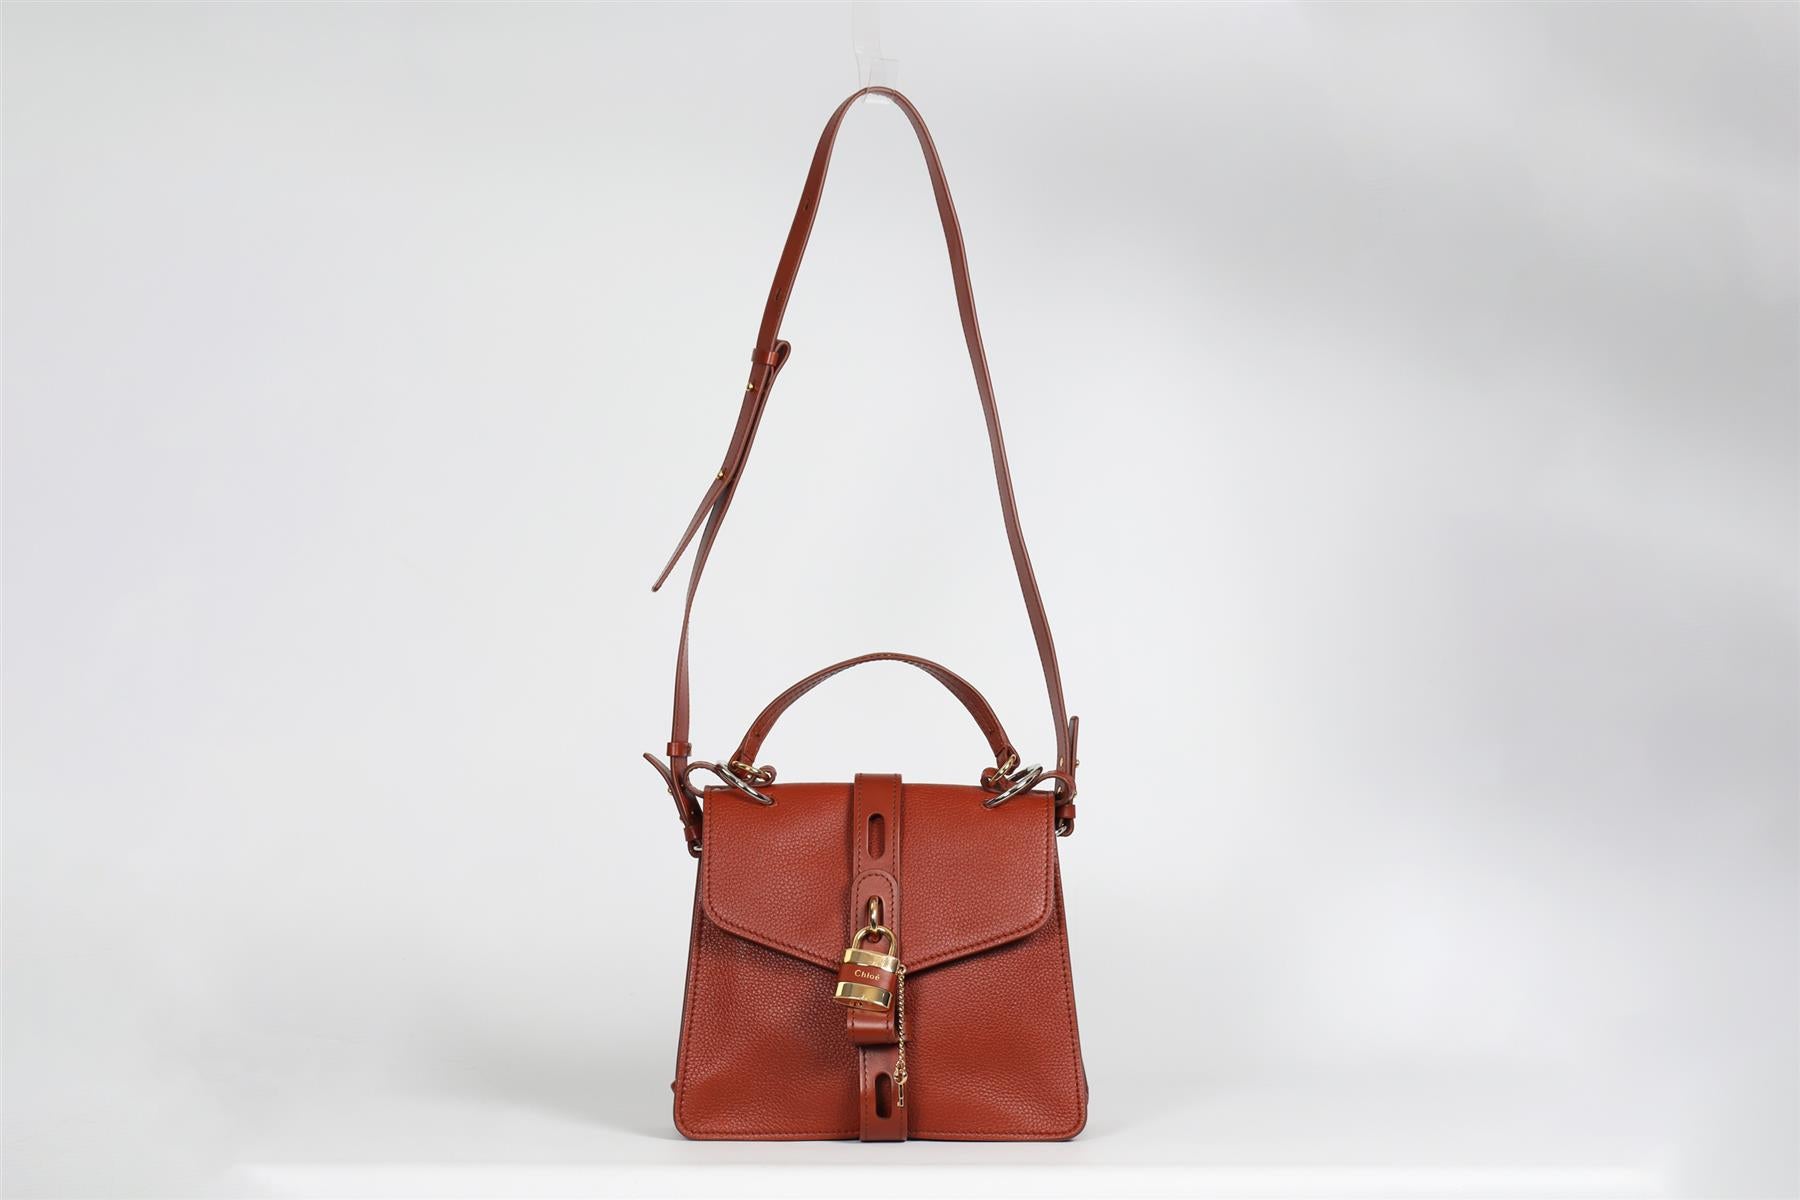 CHLOÉ ABY LEATHER SHOULDER BAG